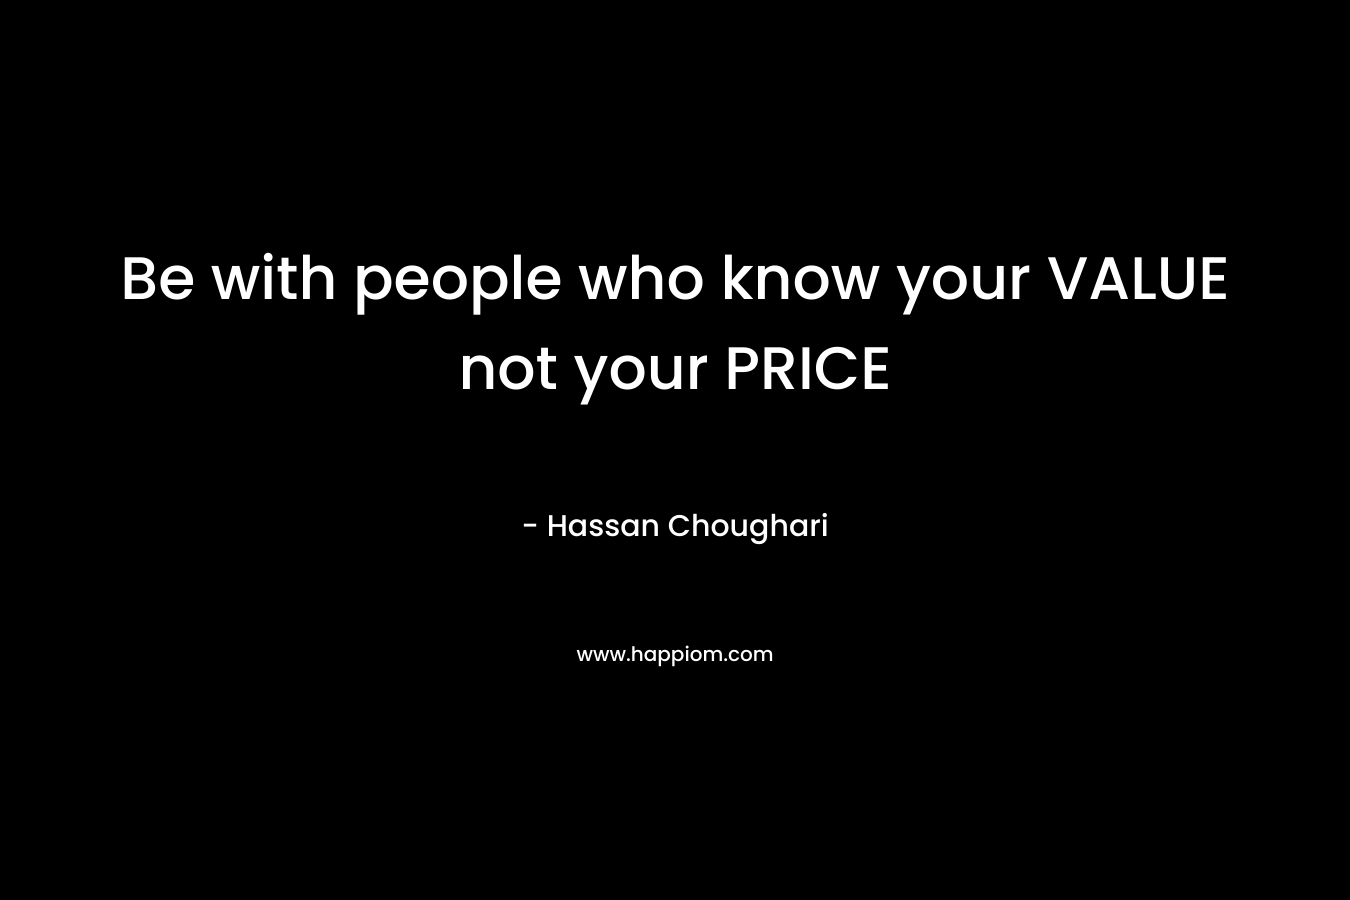 Be with people who know your VALUE not your PRICE